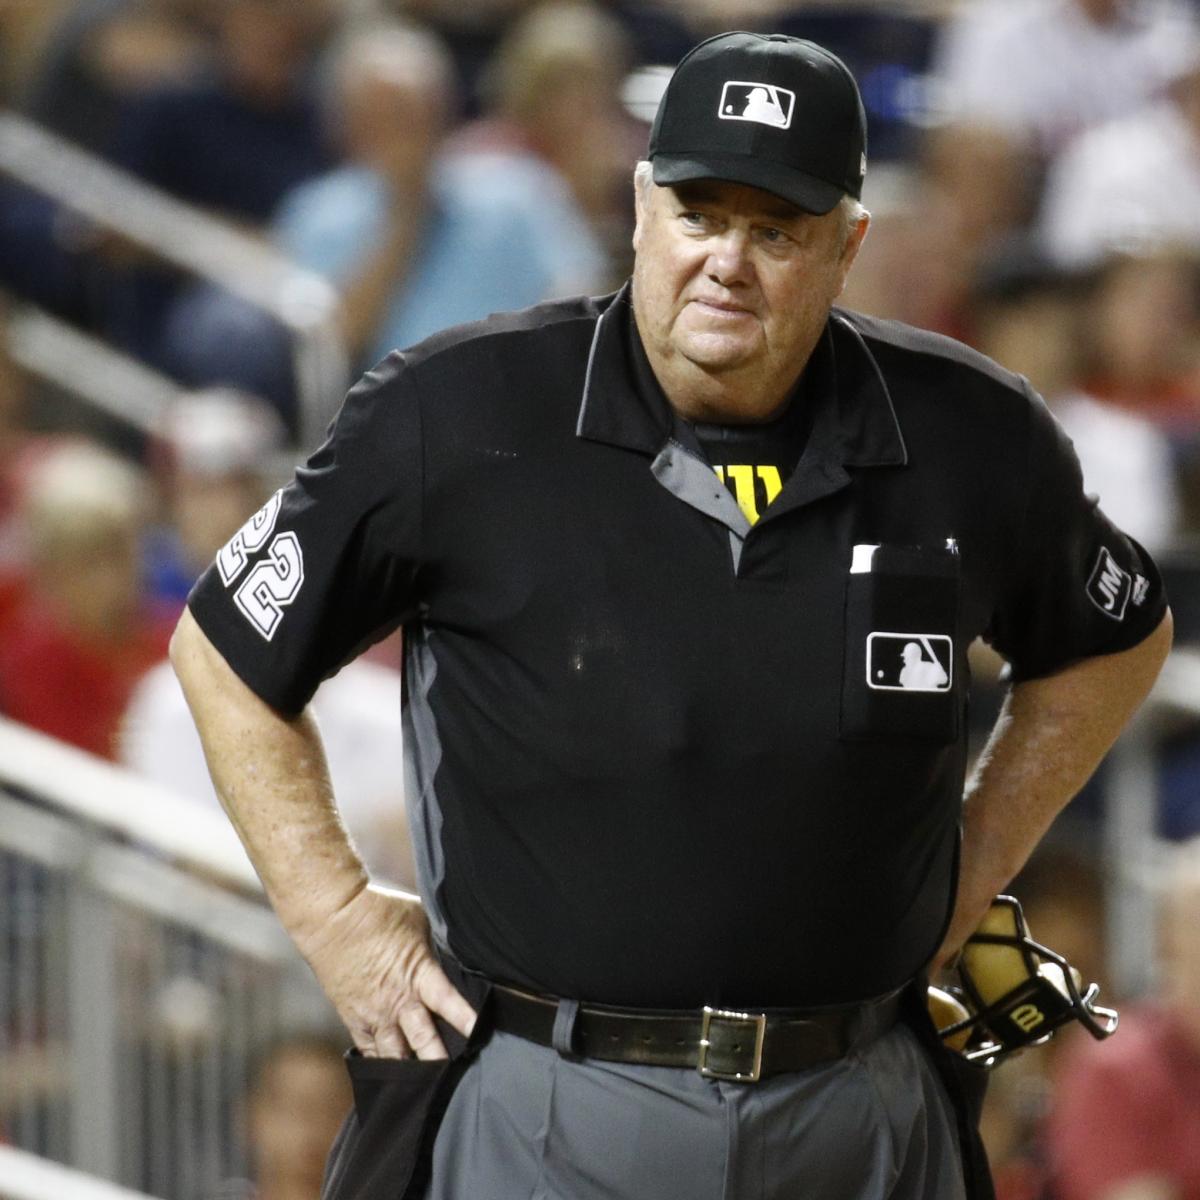 MLB Umpires Union Issues Statement After Joe West's Comments on COVID ...